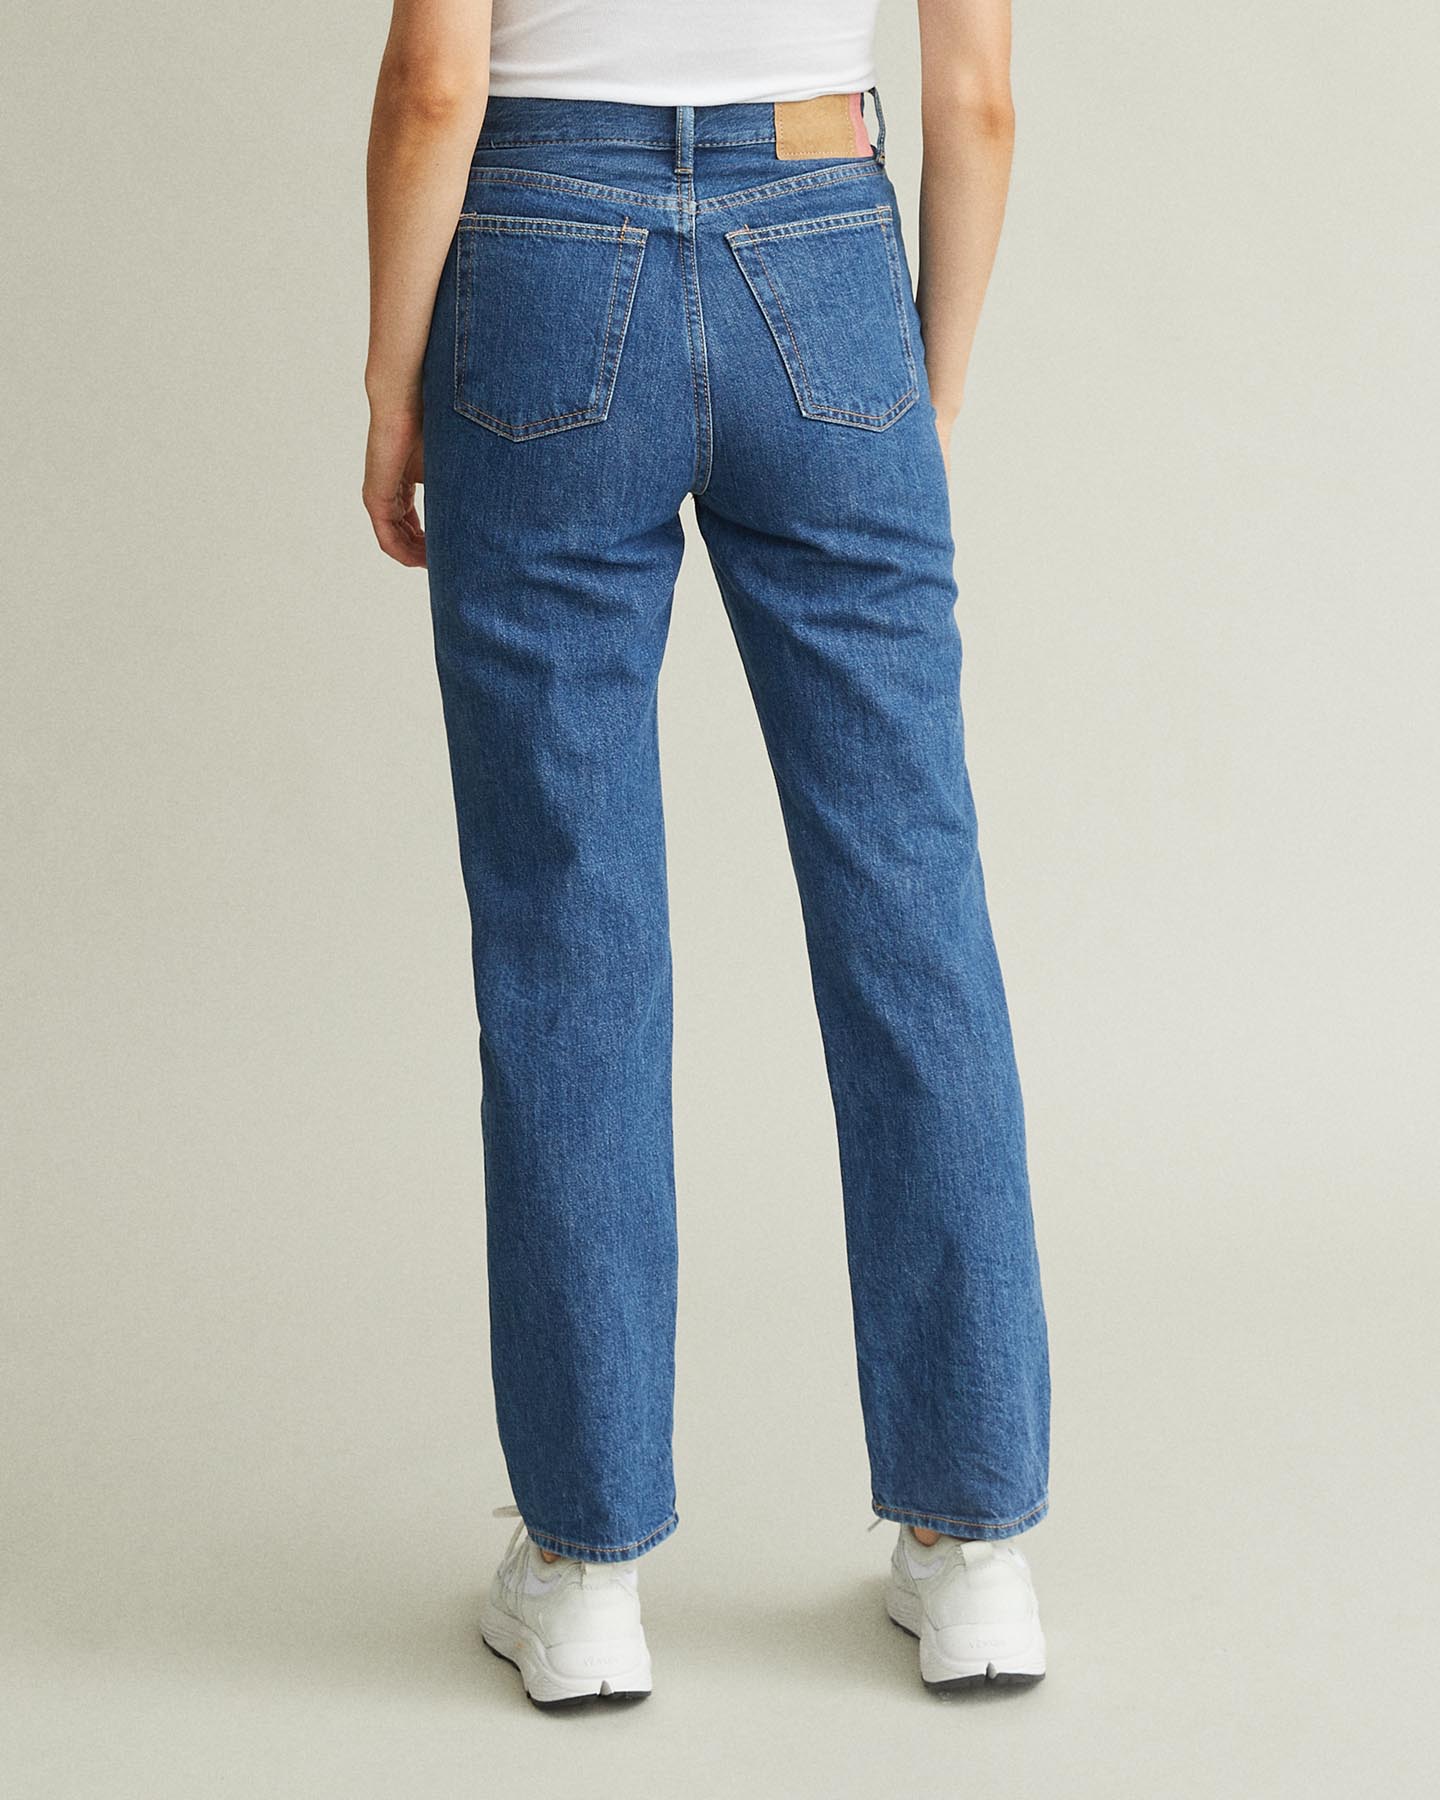 acne cropped jeans